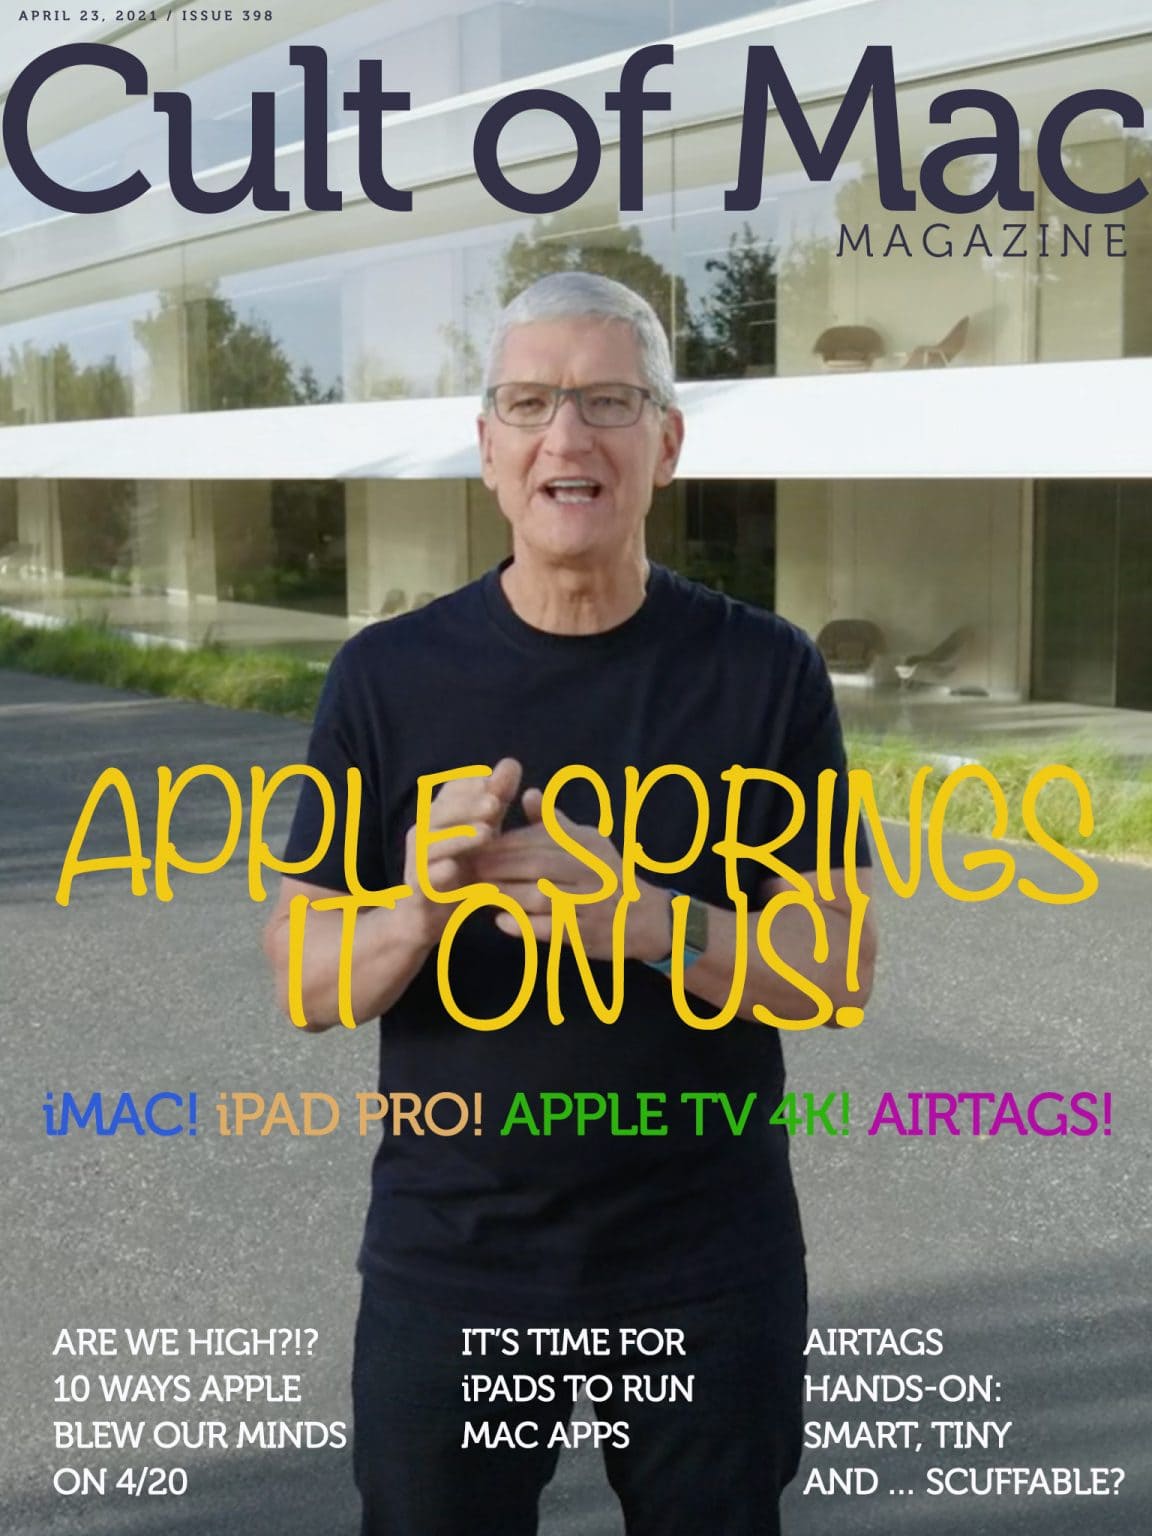 Apple Spring Loaded event: Full coverage in Cult of Mac Magazine.